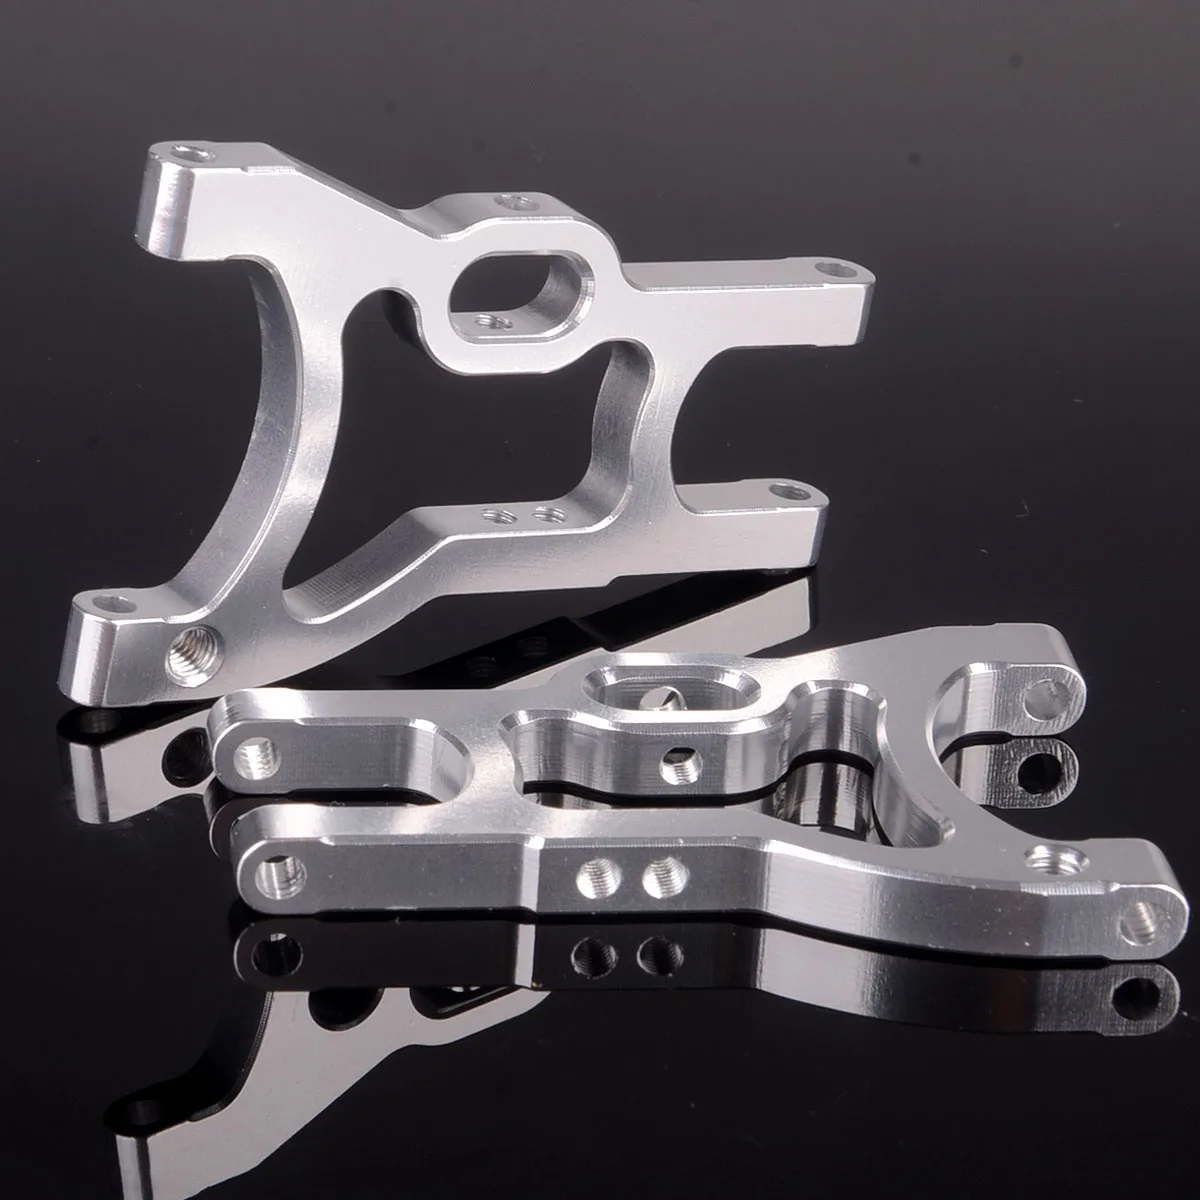 102021 Aluminum Rear Lower Suspension Arm 02007/02160 Upgrade Parts For HSP Redcat 1/10 RC On-Road Drift Car